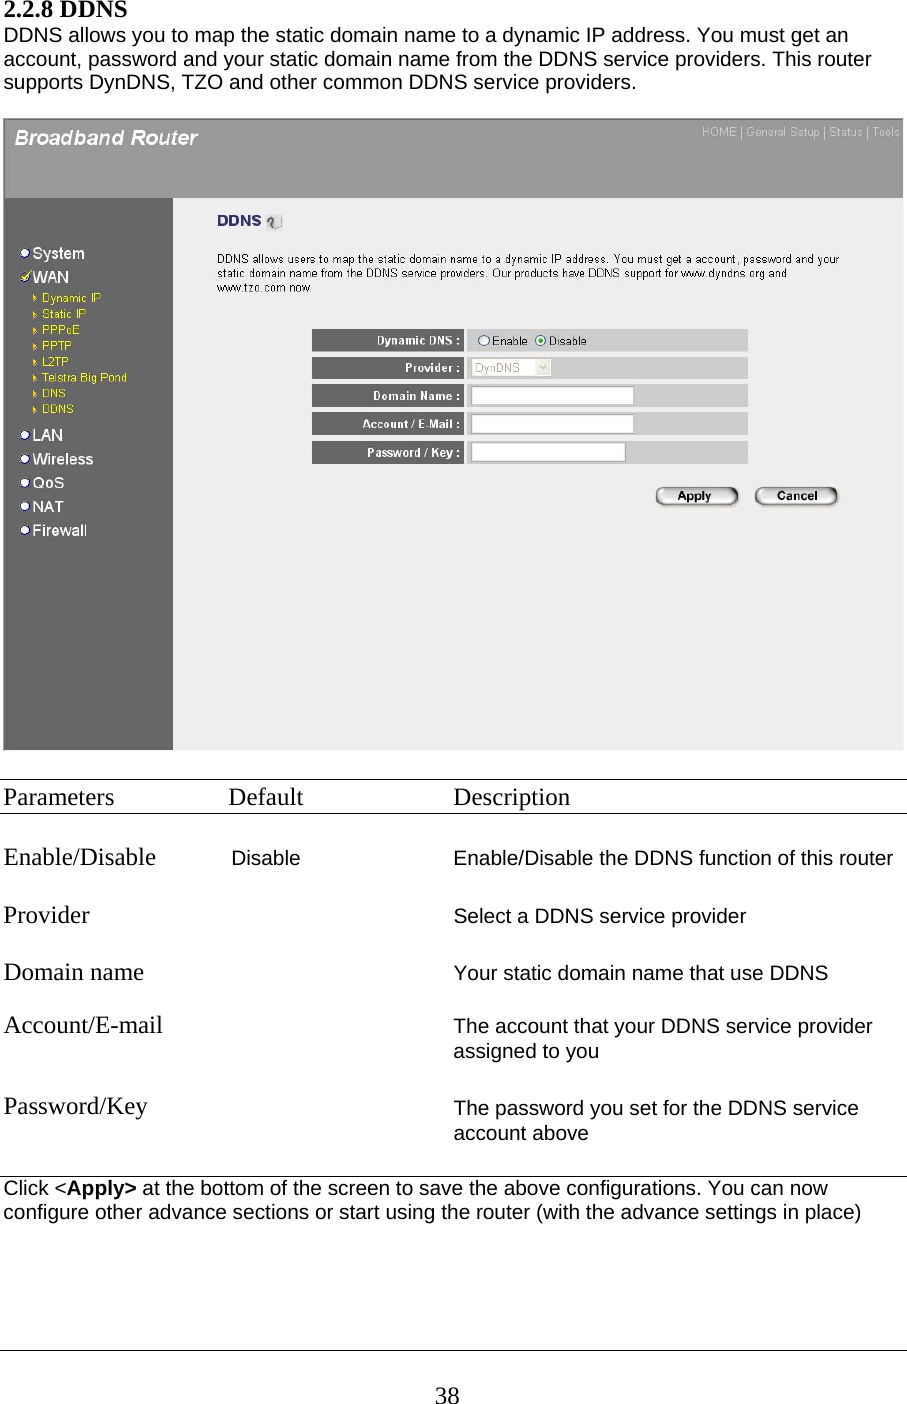 2.2.8 DDNS DDNS allows you to map the static domain name to a dynamic IP address. You must get an account, password and your static domain name from the DDNS service providers. This router supports DynDNS, TZO and other common DDNS service providers.    Parameters  Default  Description  Enable/Disable            Disable  Enable/Disable the DDNS function of this router  Provider                         Select a DDNS service provider  Domain name                            Your static domain name that use DDNS  Account/E-mail  The account that your DDNS service provider assigned to you    Password/Key The password you set for the DDNS service account above  Click &lt;Apply&gt; at the bottom of the screen to save the above configurations. You can now configure other advance sections or start using the router (with the advance settings in place)     38